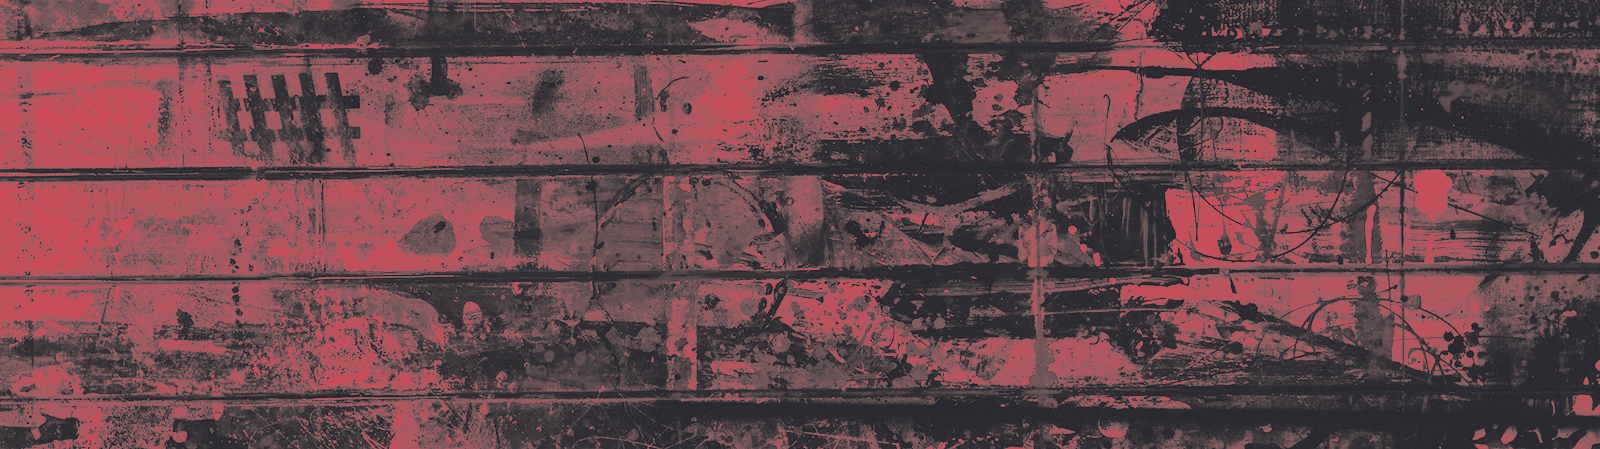 A wall splattered in paint in duotone colors